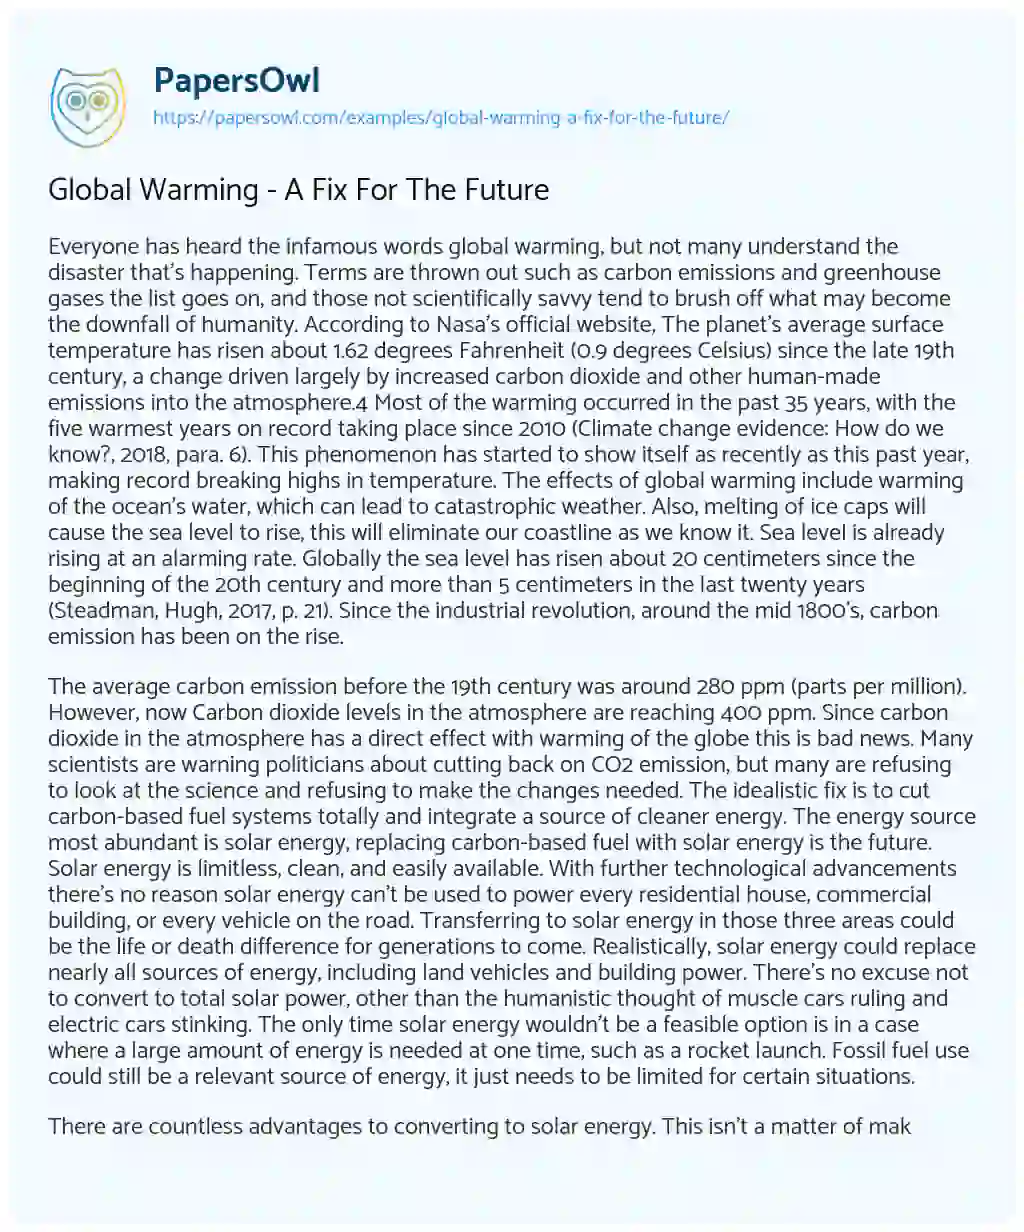 Global Warming – a Fix for the Future essay